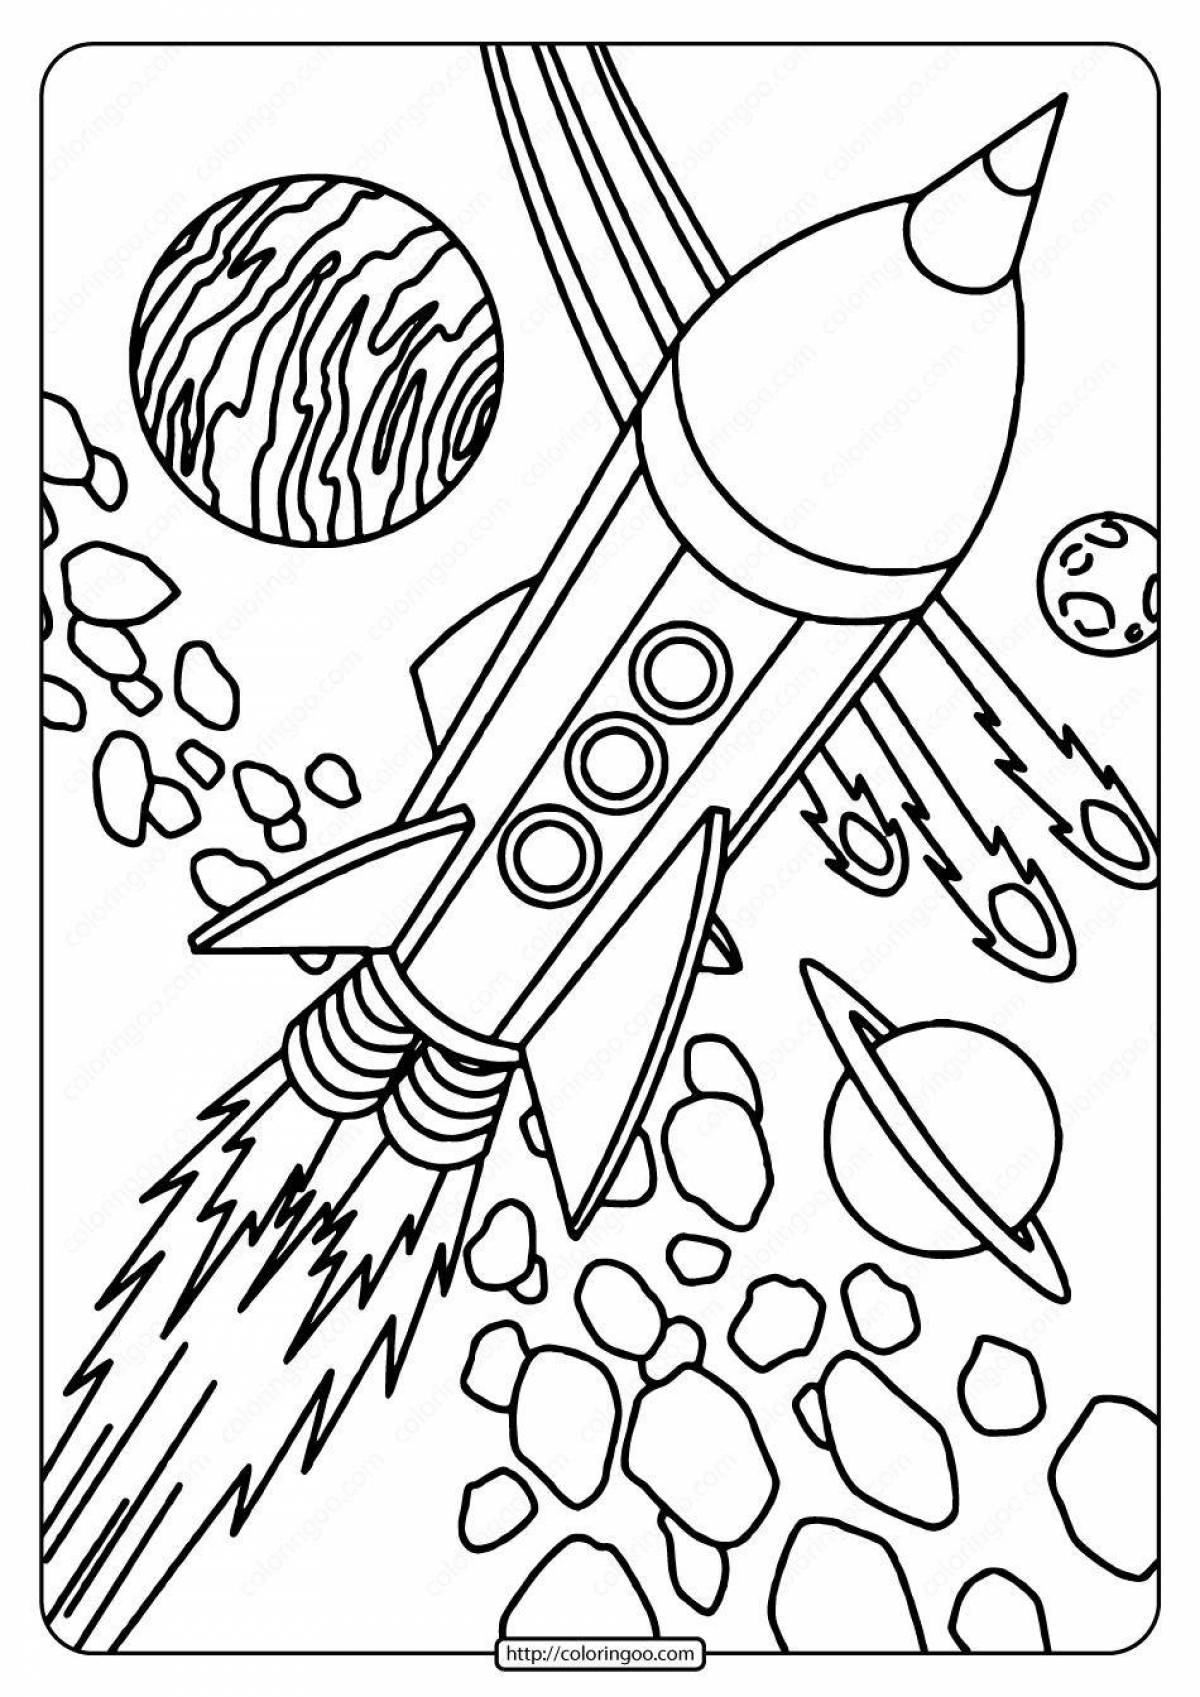 Fun rocket coloring for 6-7 year olds